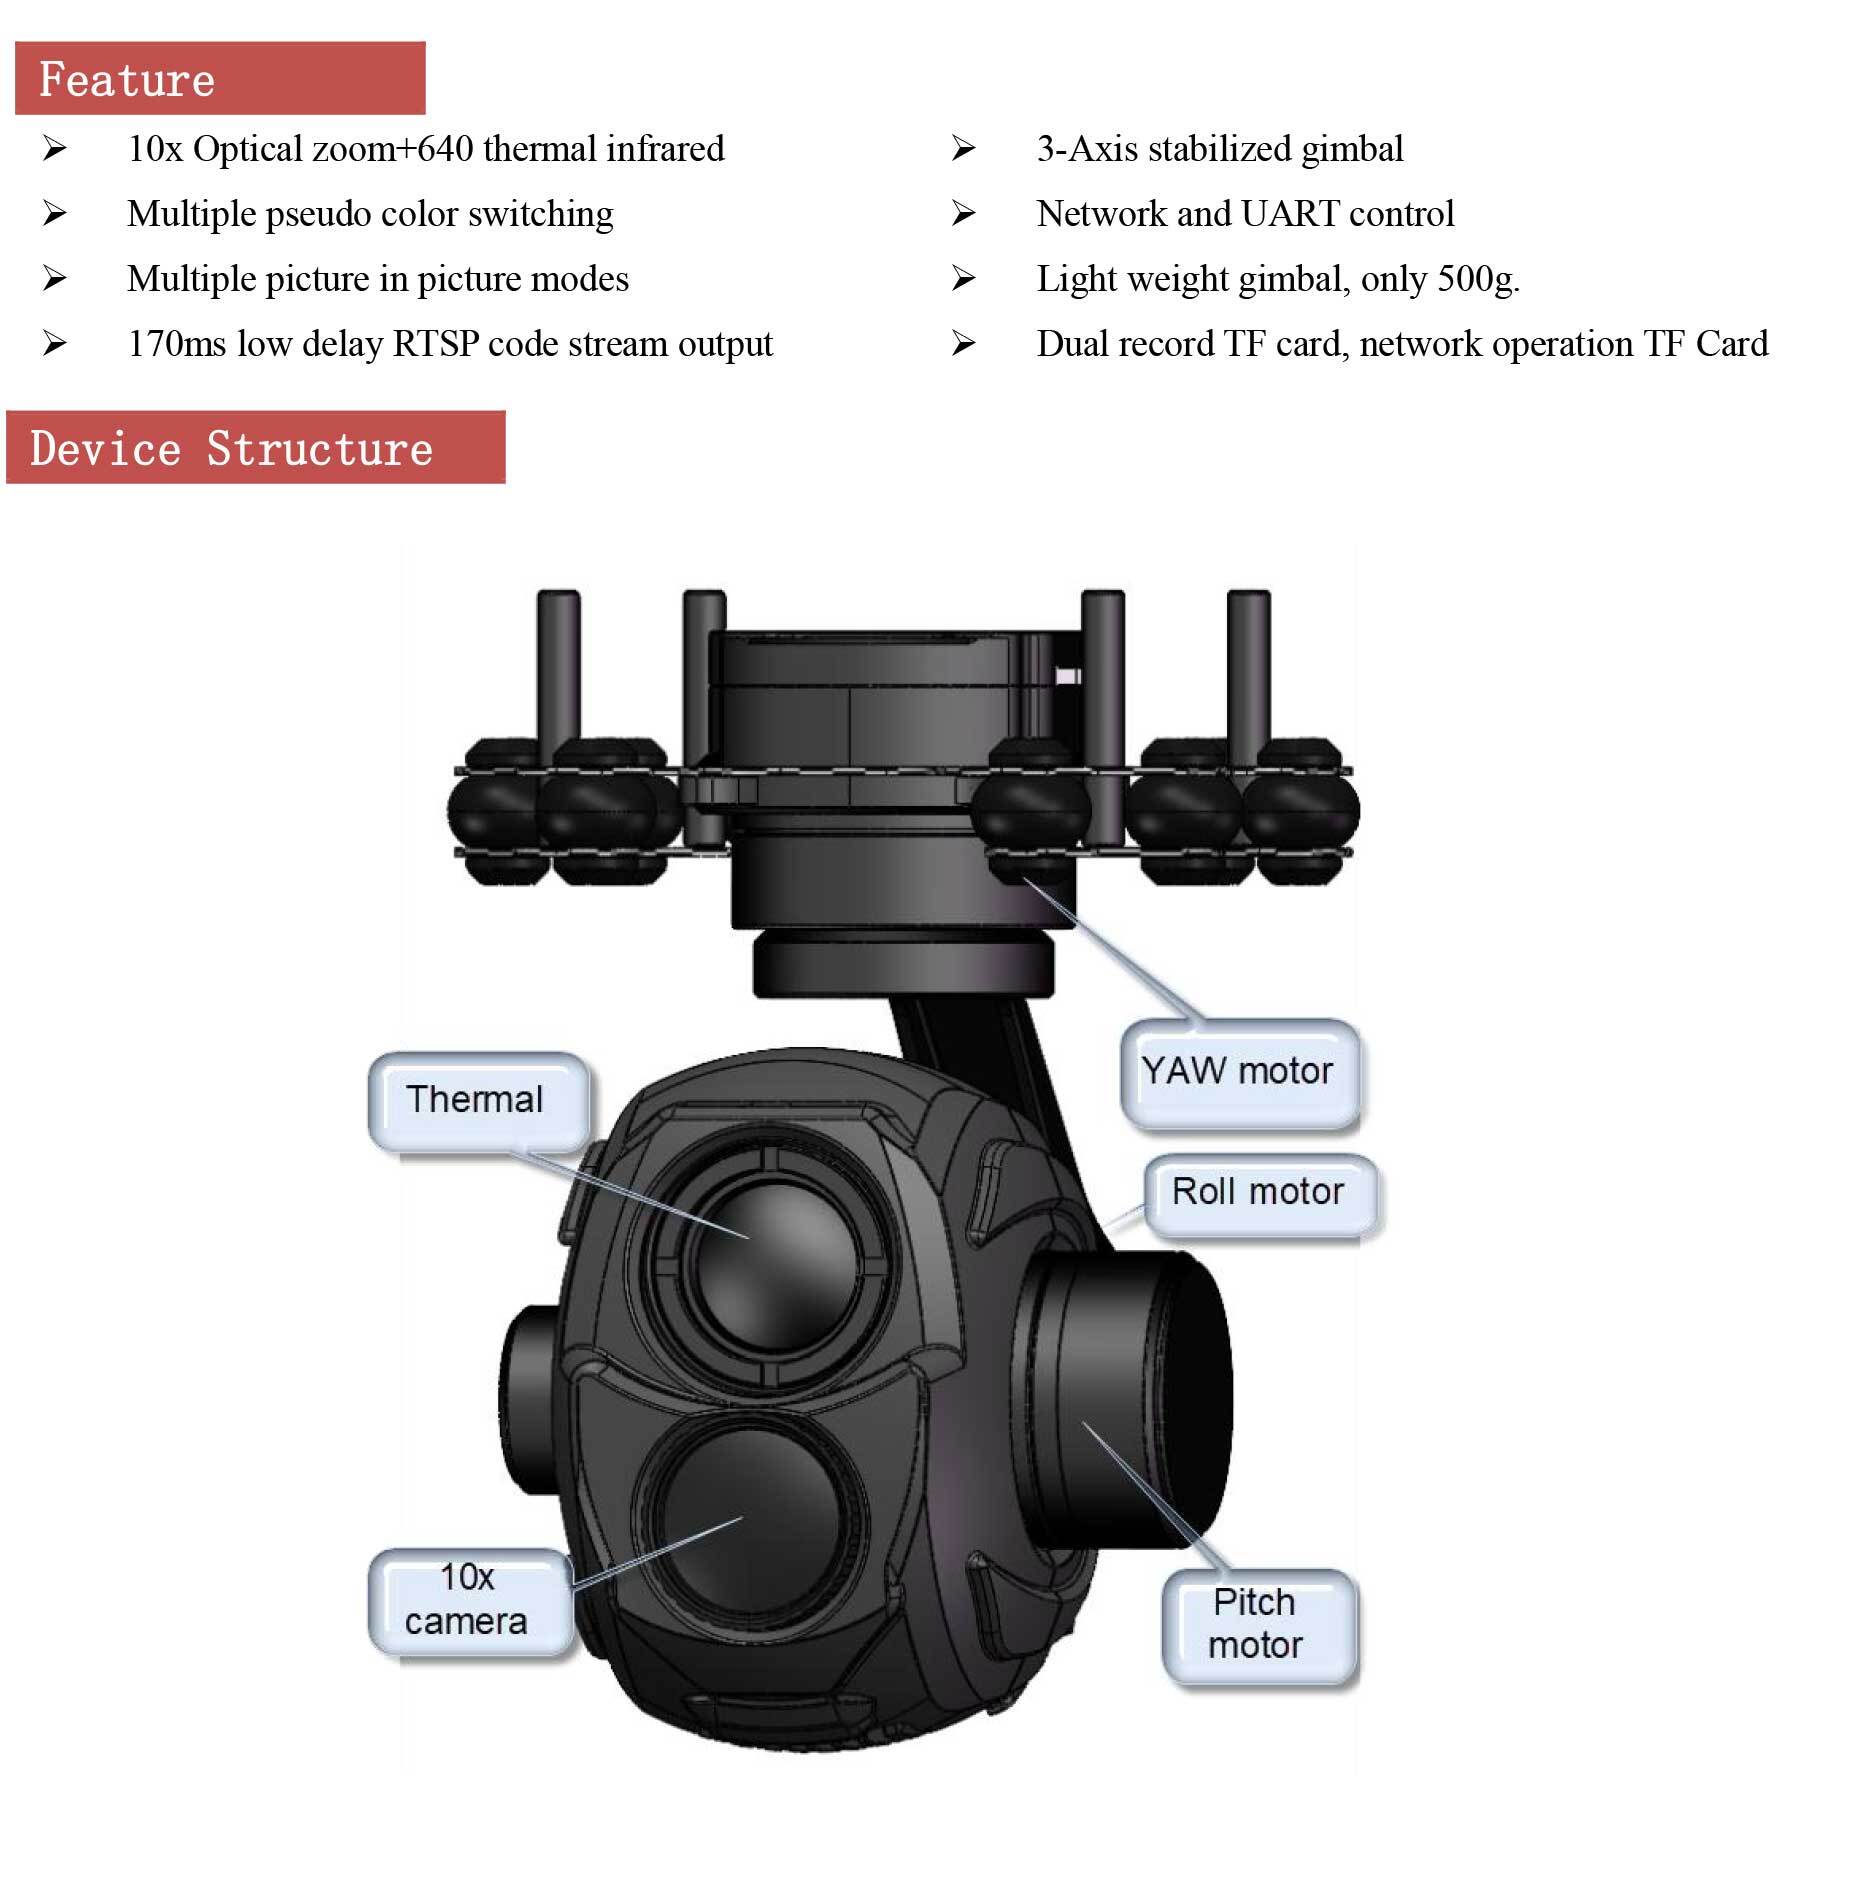 SIP10G619 10x Optical zoom camera + 640*512 thermal camera  Dual light 3-Axis Stabilized Gimbal, IP output 